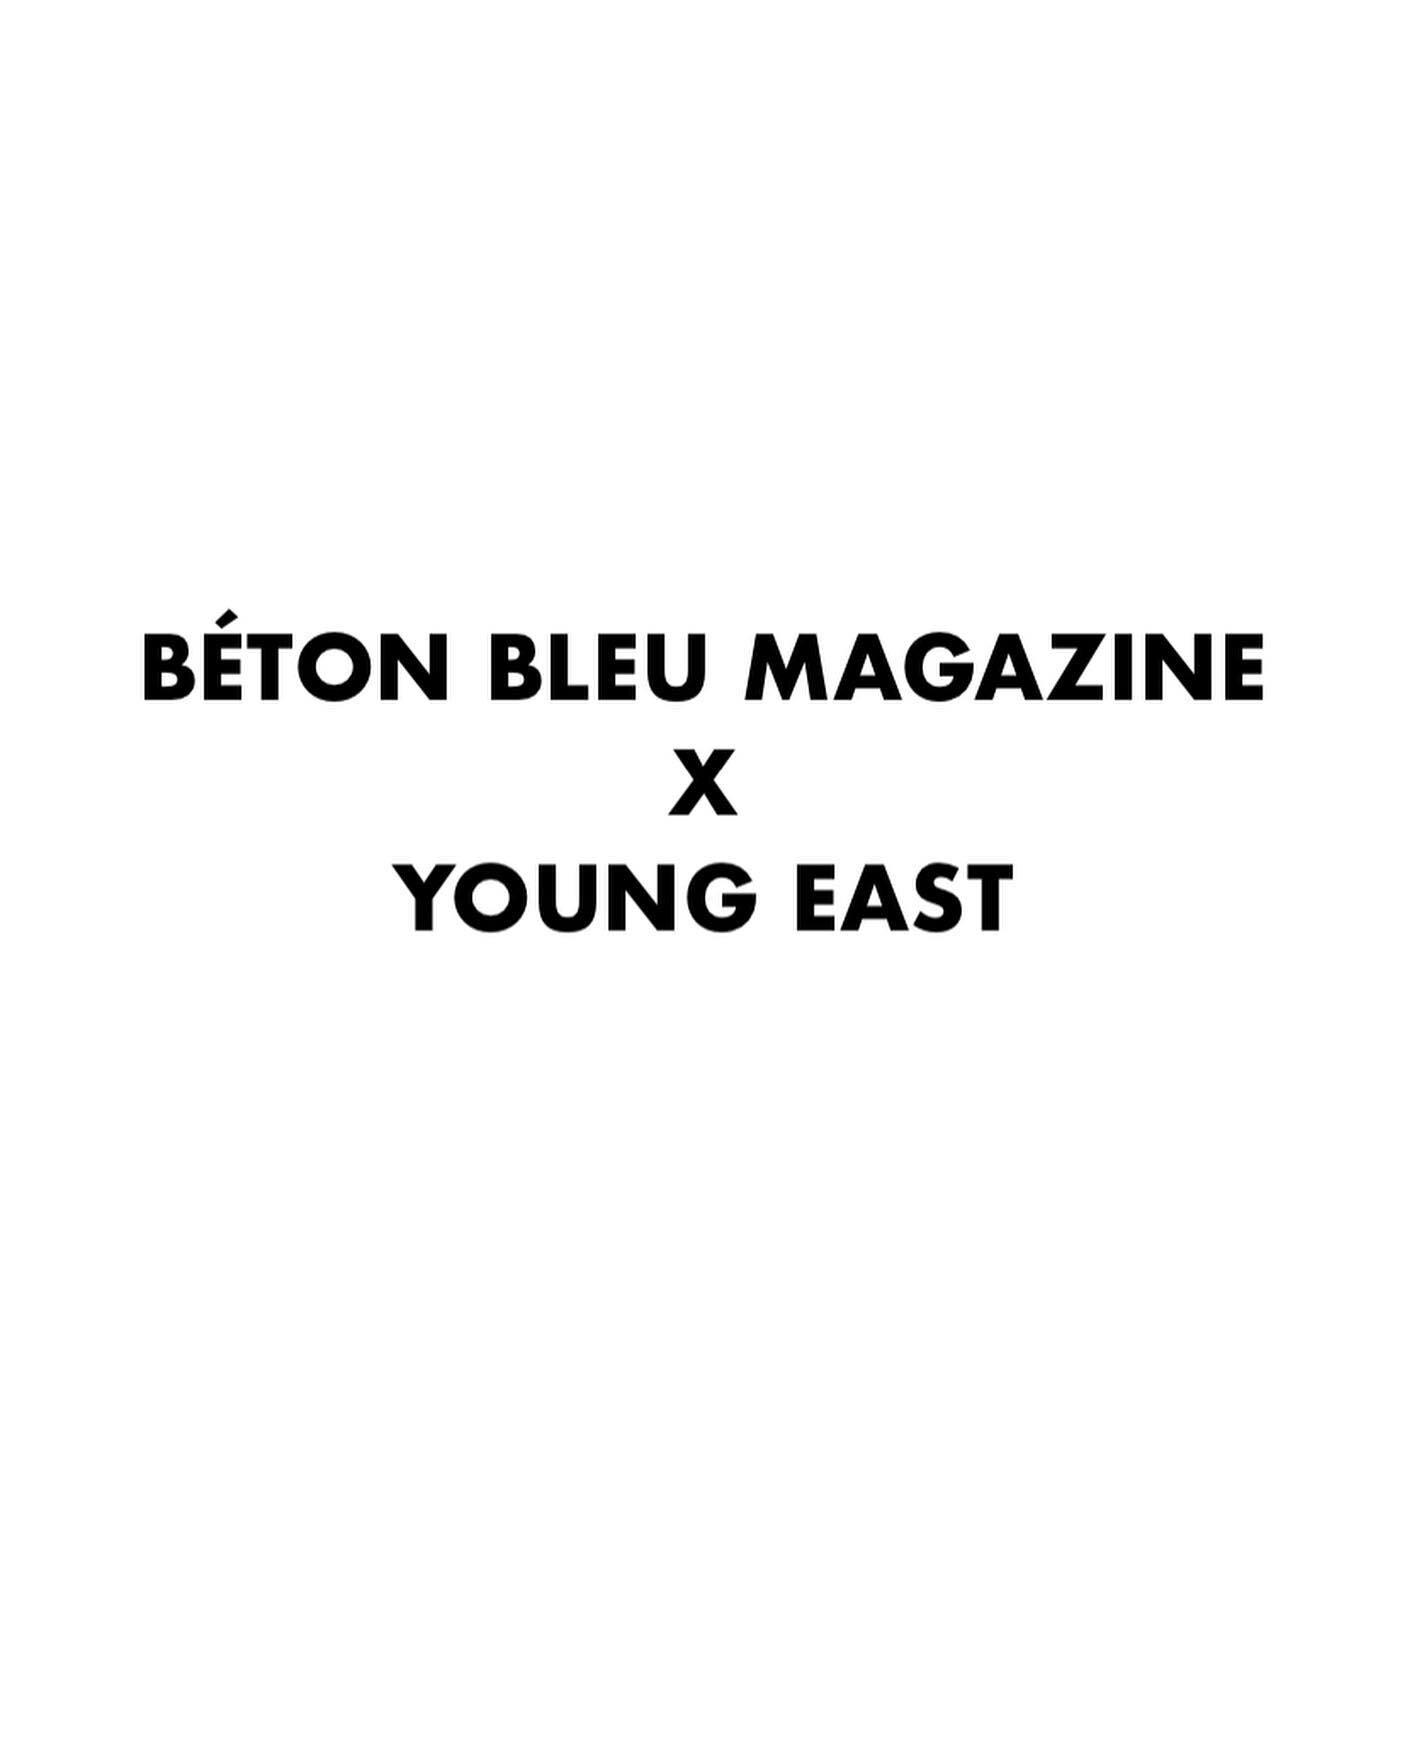 New edition of B&eacute;ton Bleu Magazine x Young East🔥

Featuring @iamkinderalbum @sergekononov @julia.beliaeva.art 

The works of all three artists can currently be seen at the group exhibition The Time Has Come (February 24 - March 24, 2023) in B